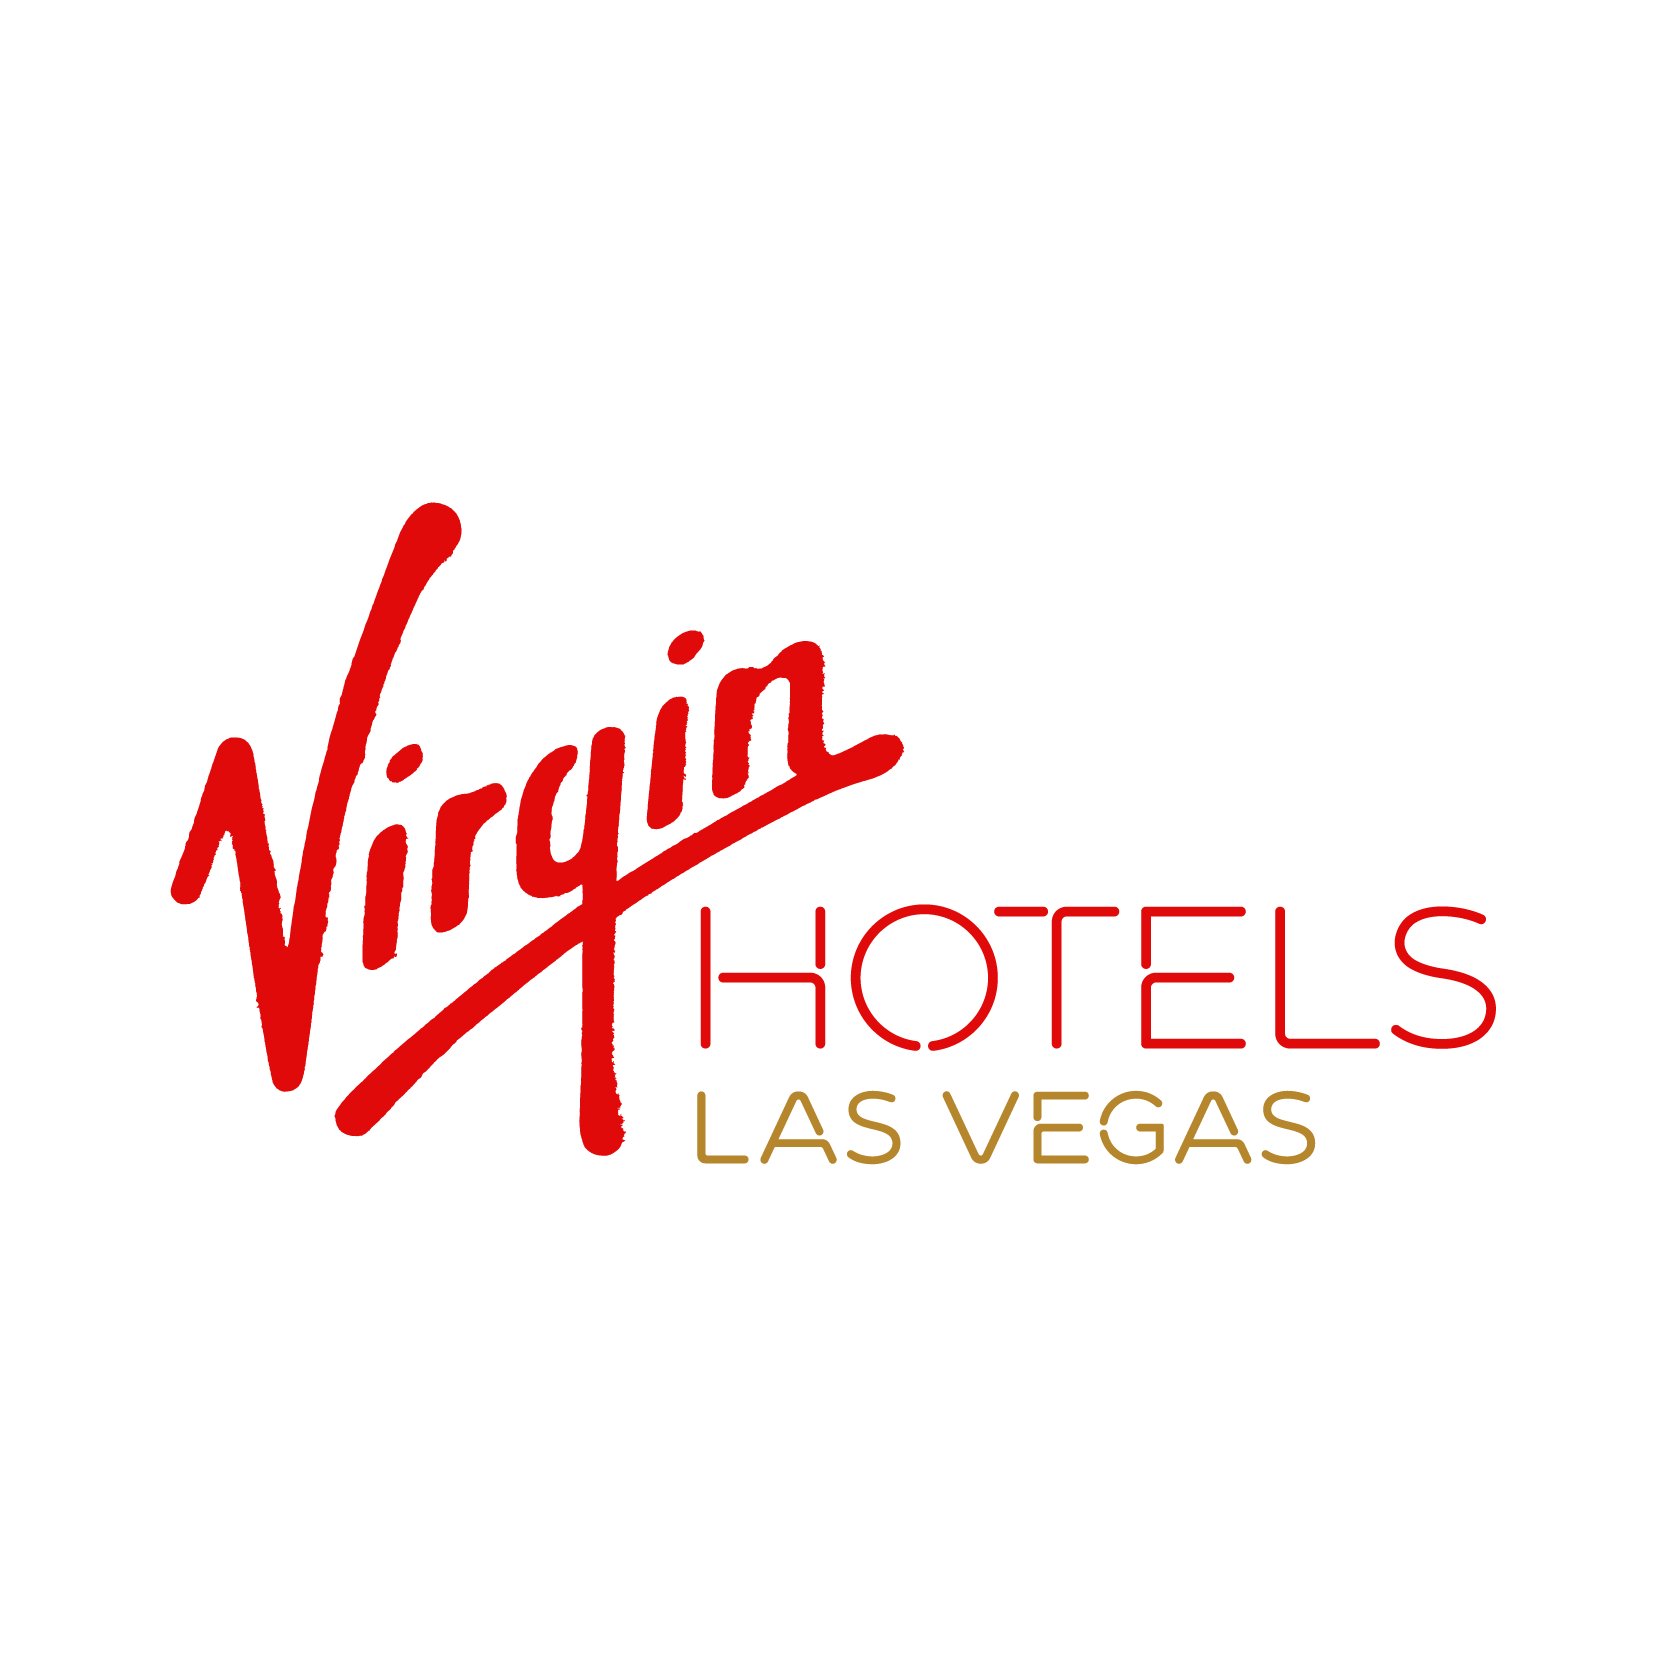 Opening in 2020
Follow along for brand updates @virginhotels